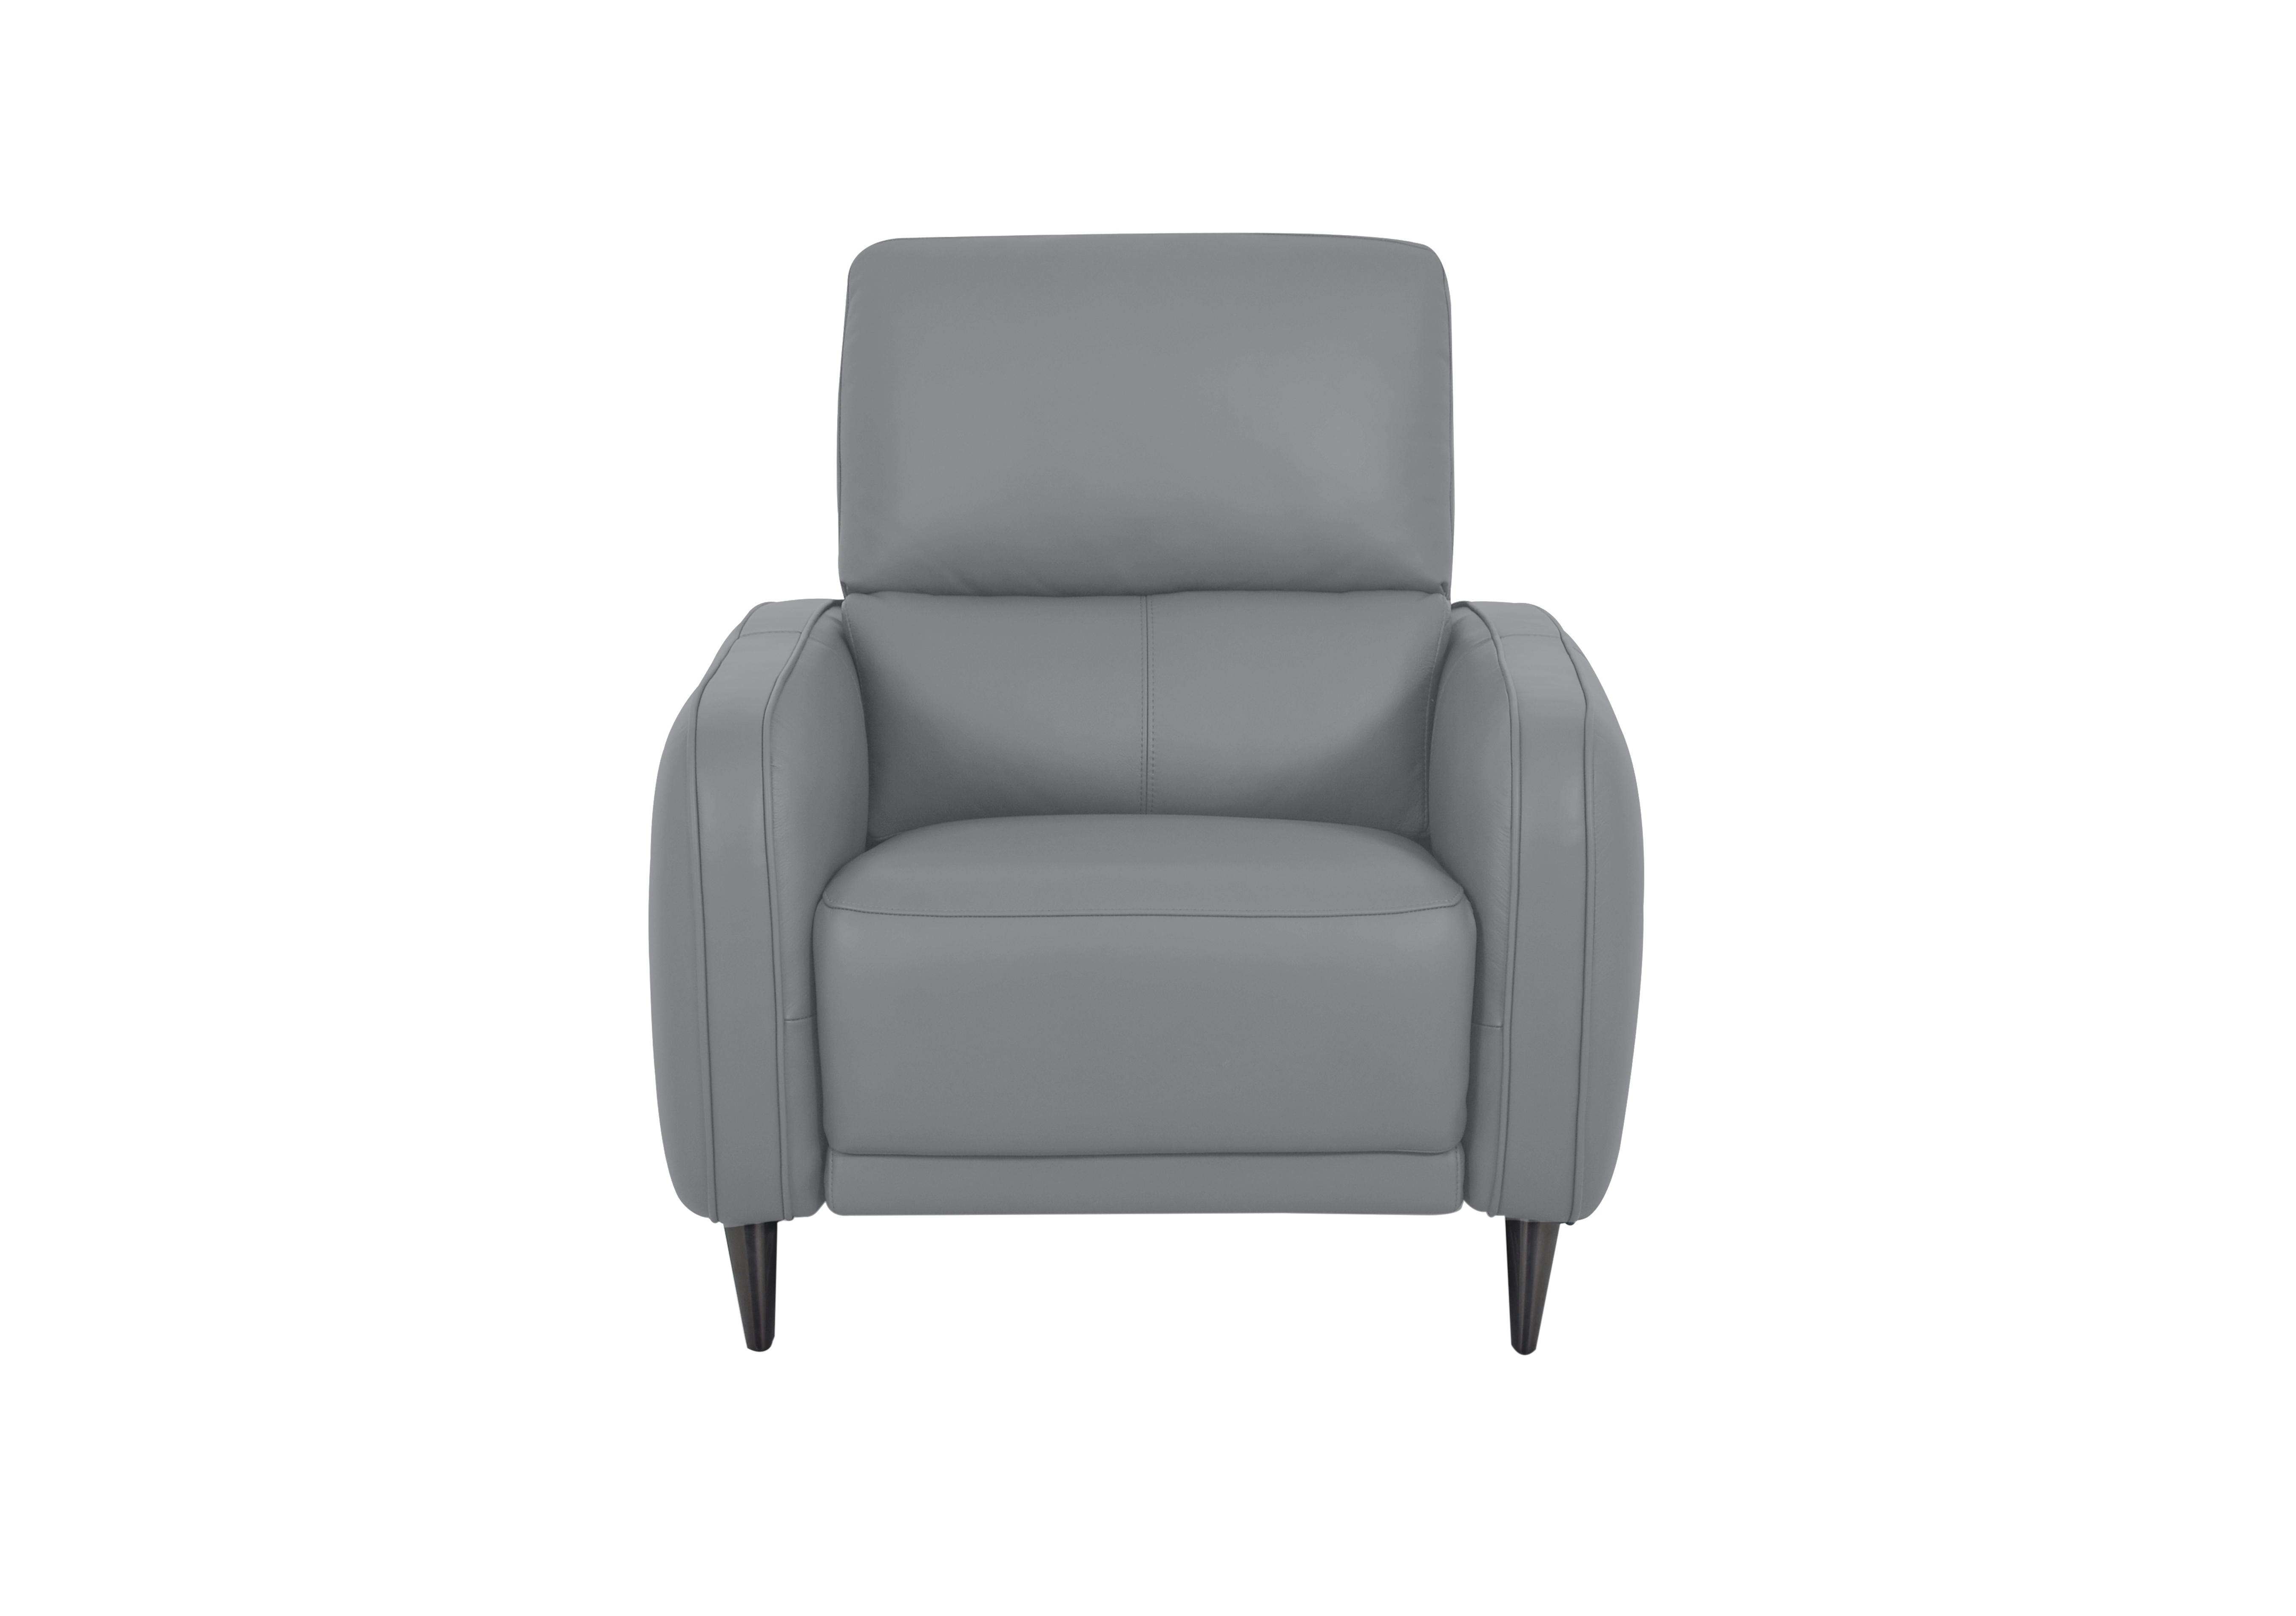 Logan Leather Chair in Np-605e Paloma Grey on Furniture Village